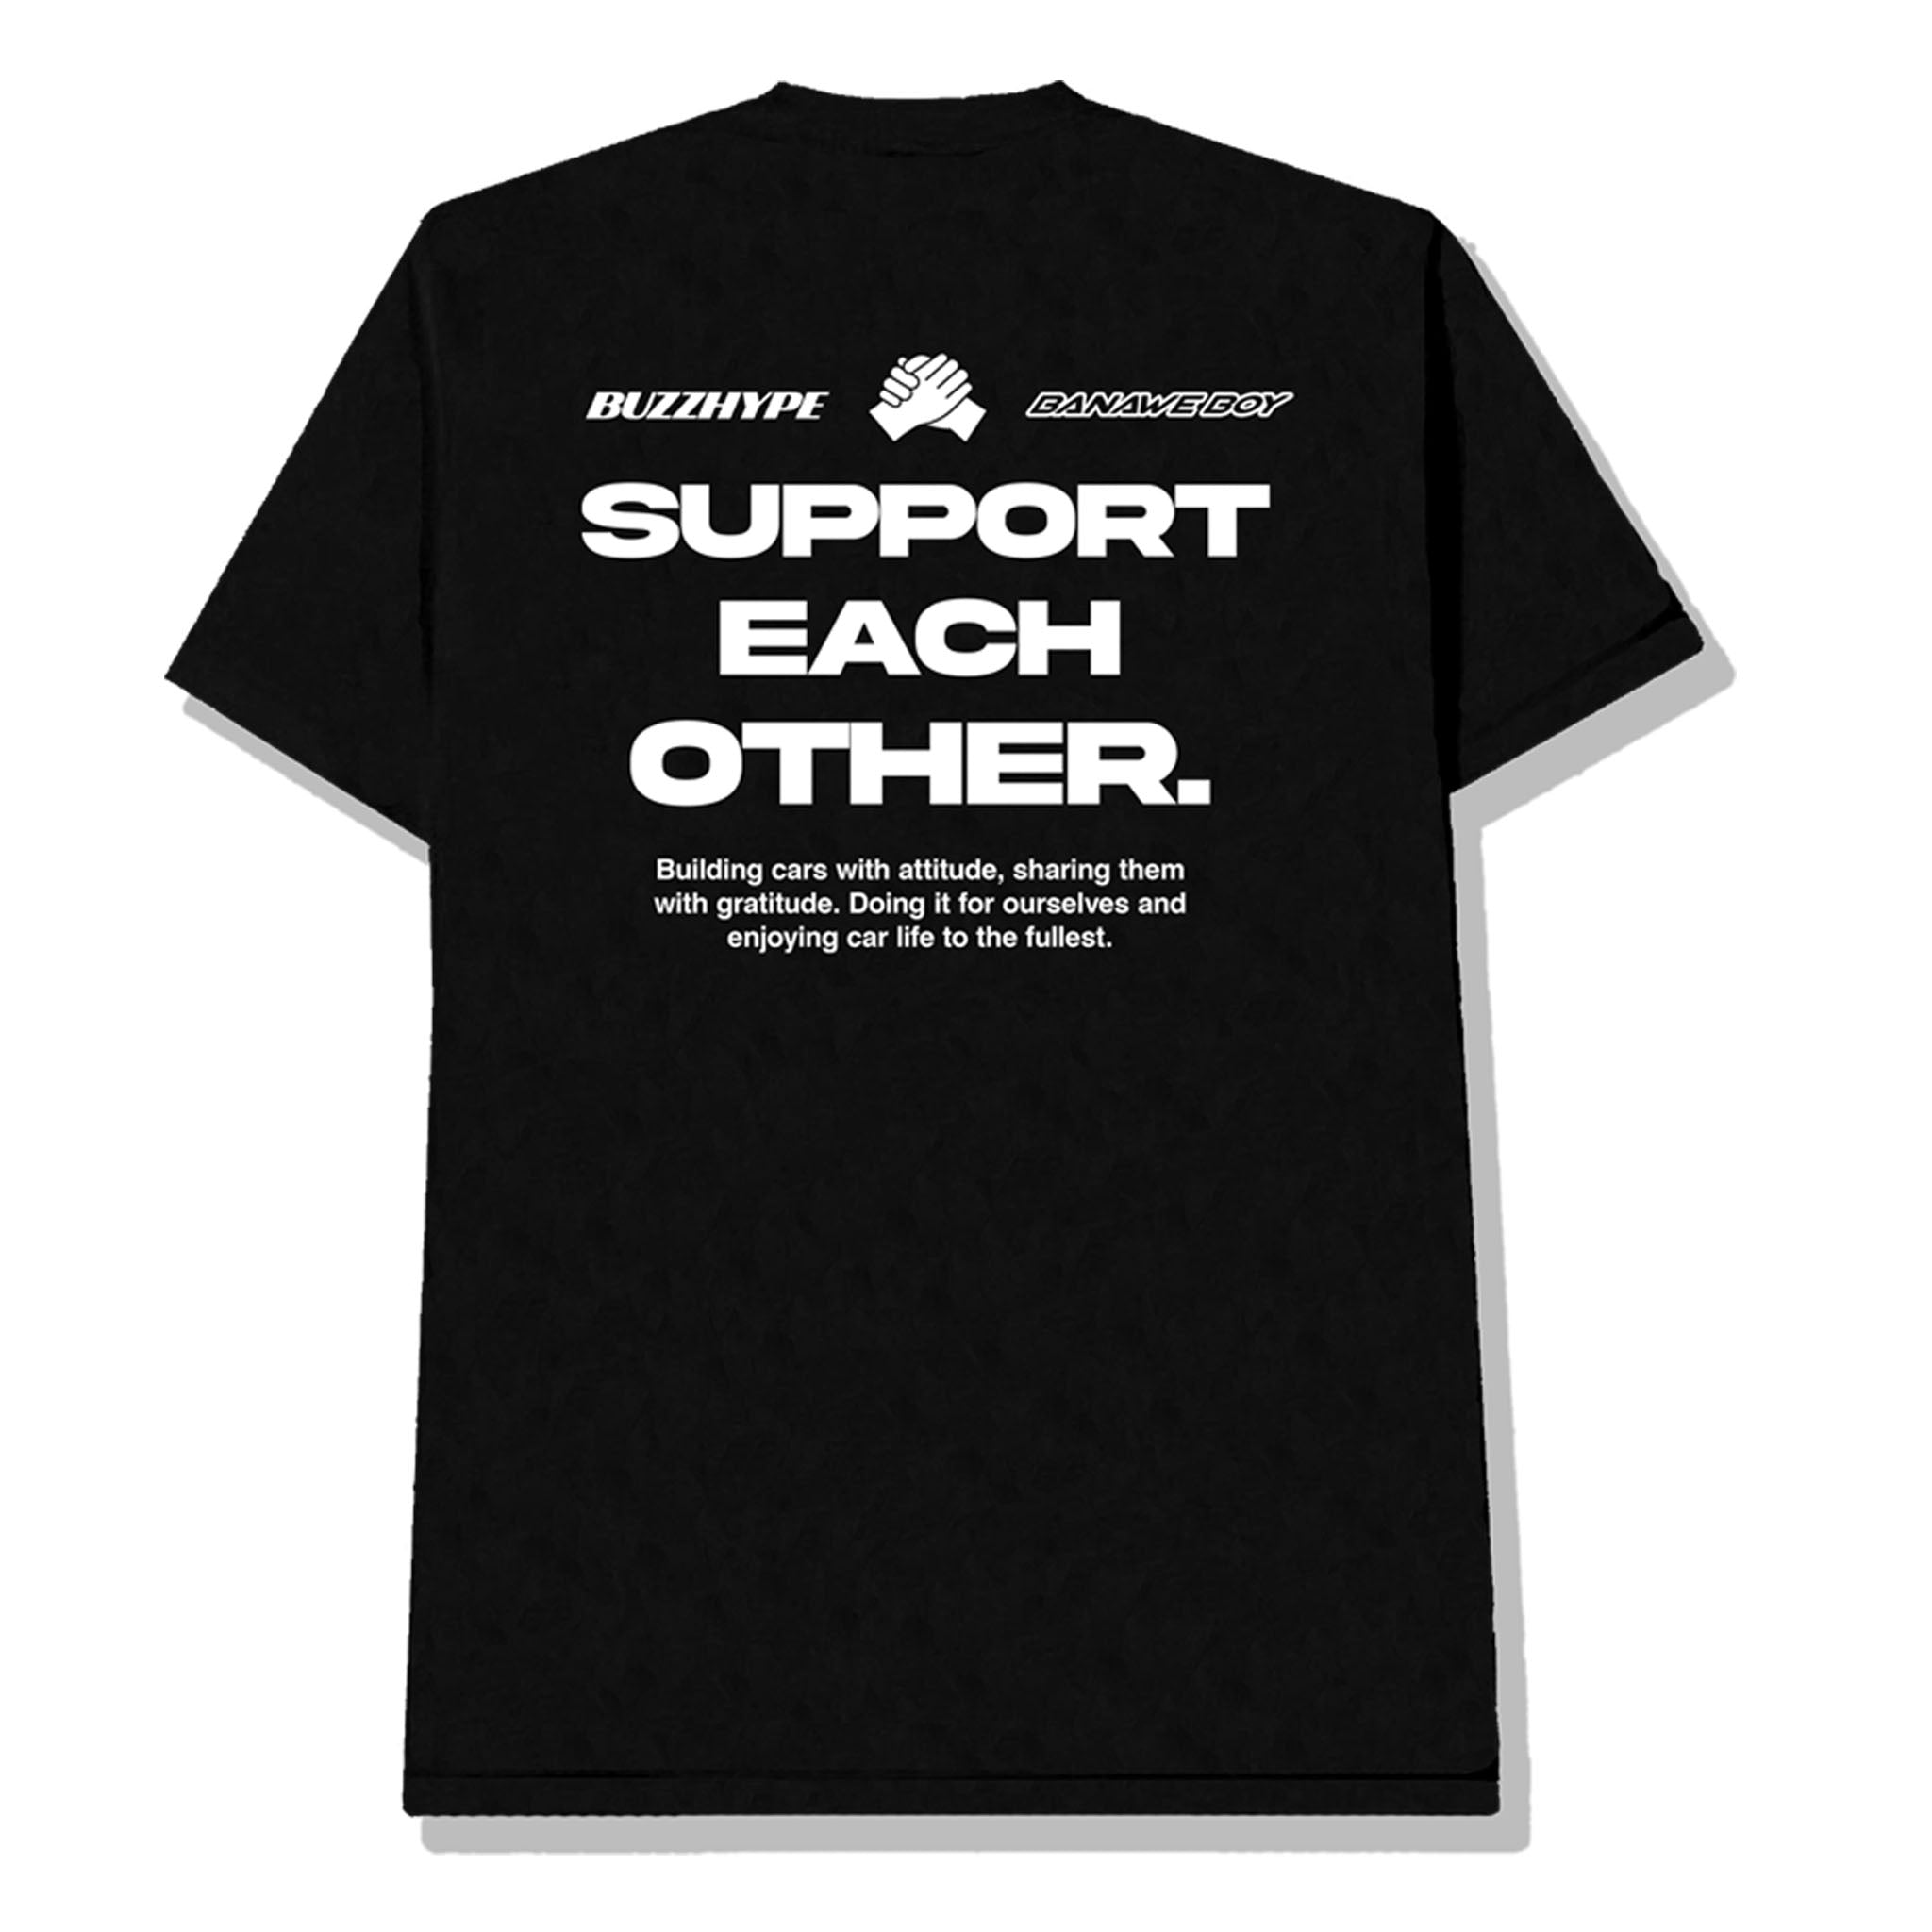 Support Each Other in Black Tee